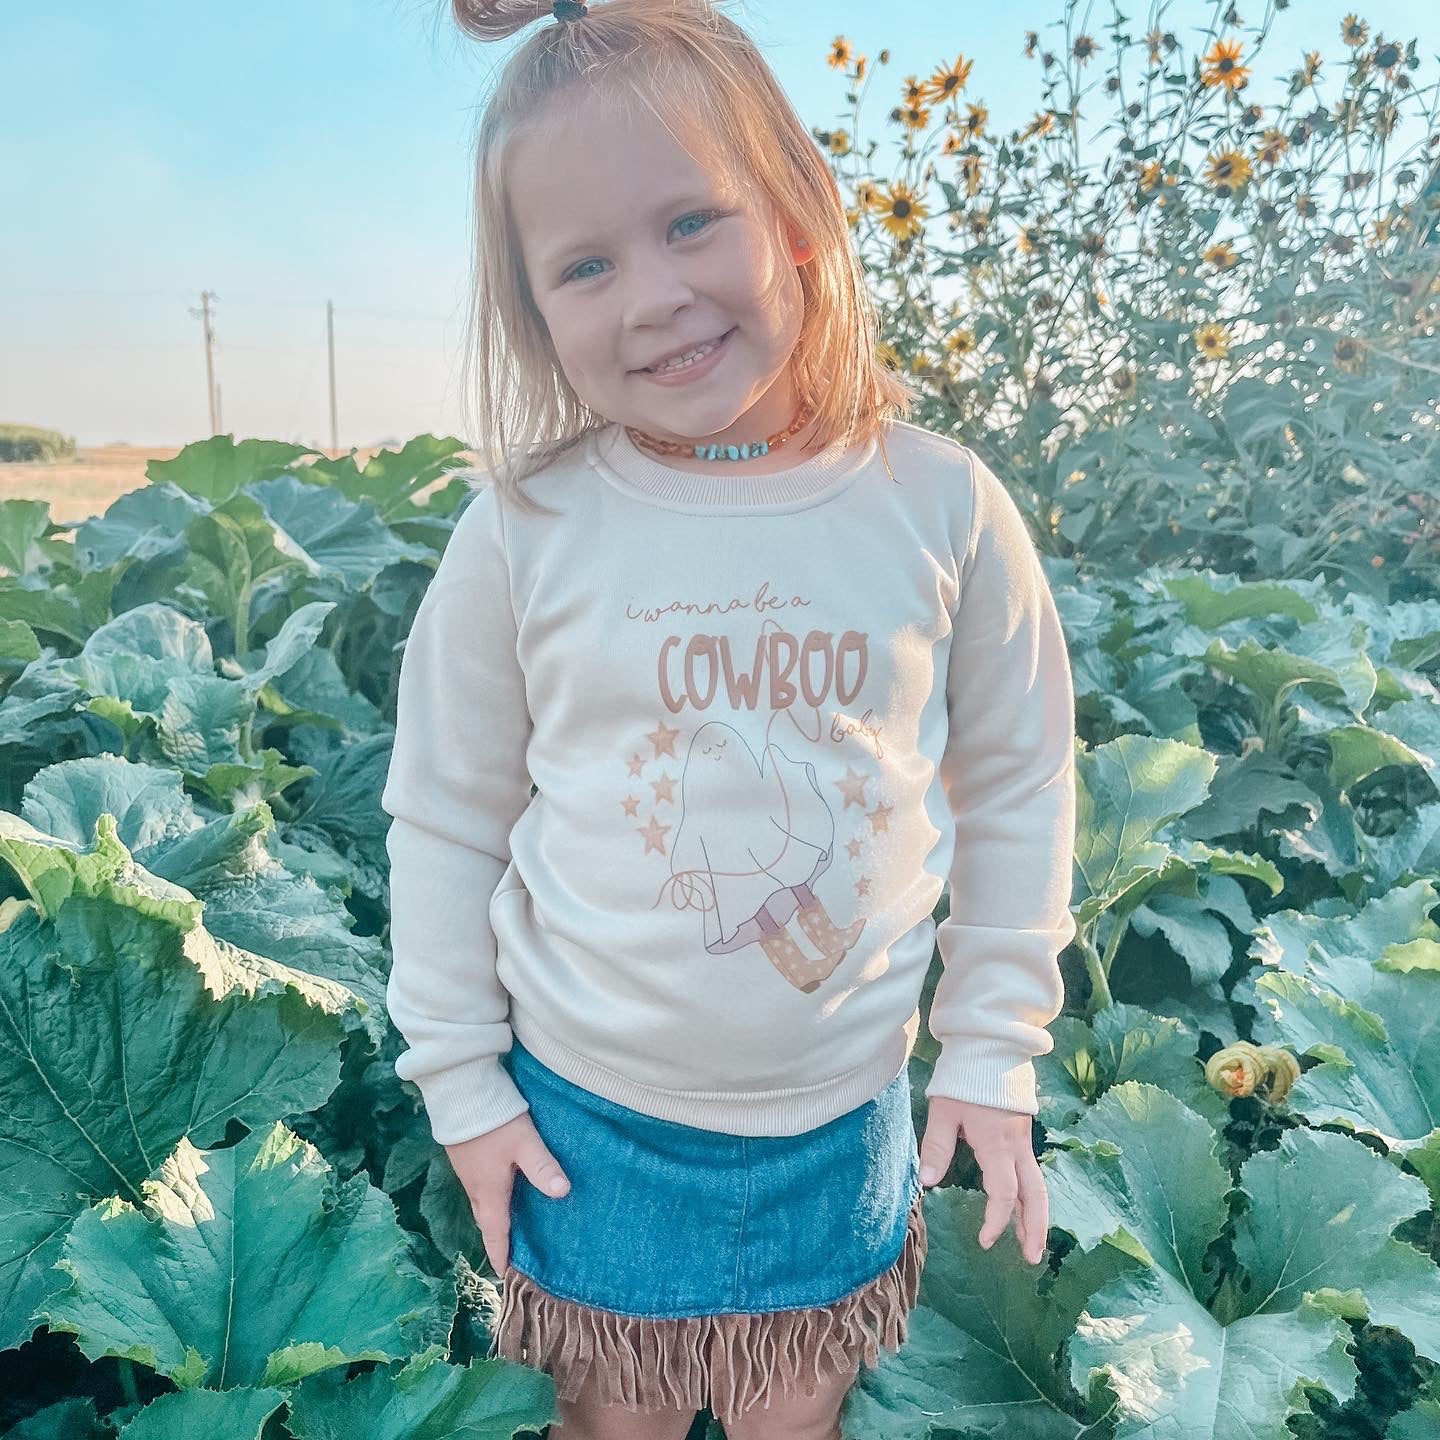 the I Wanna be a |CowBoo| Baby ladies tee